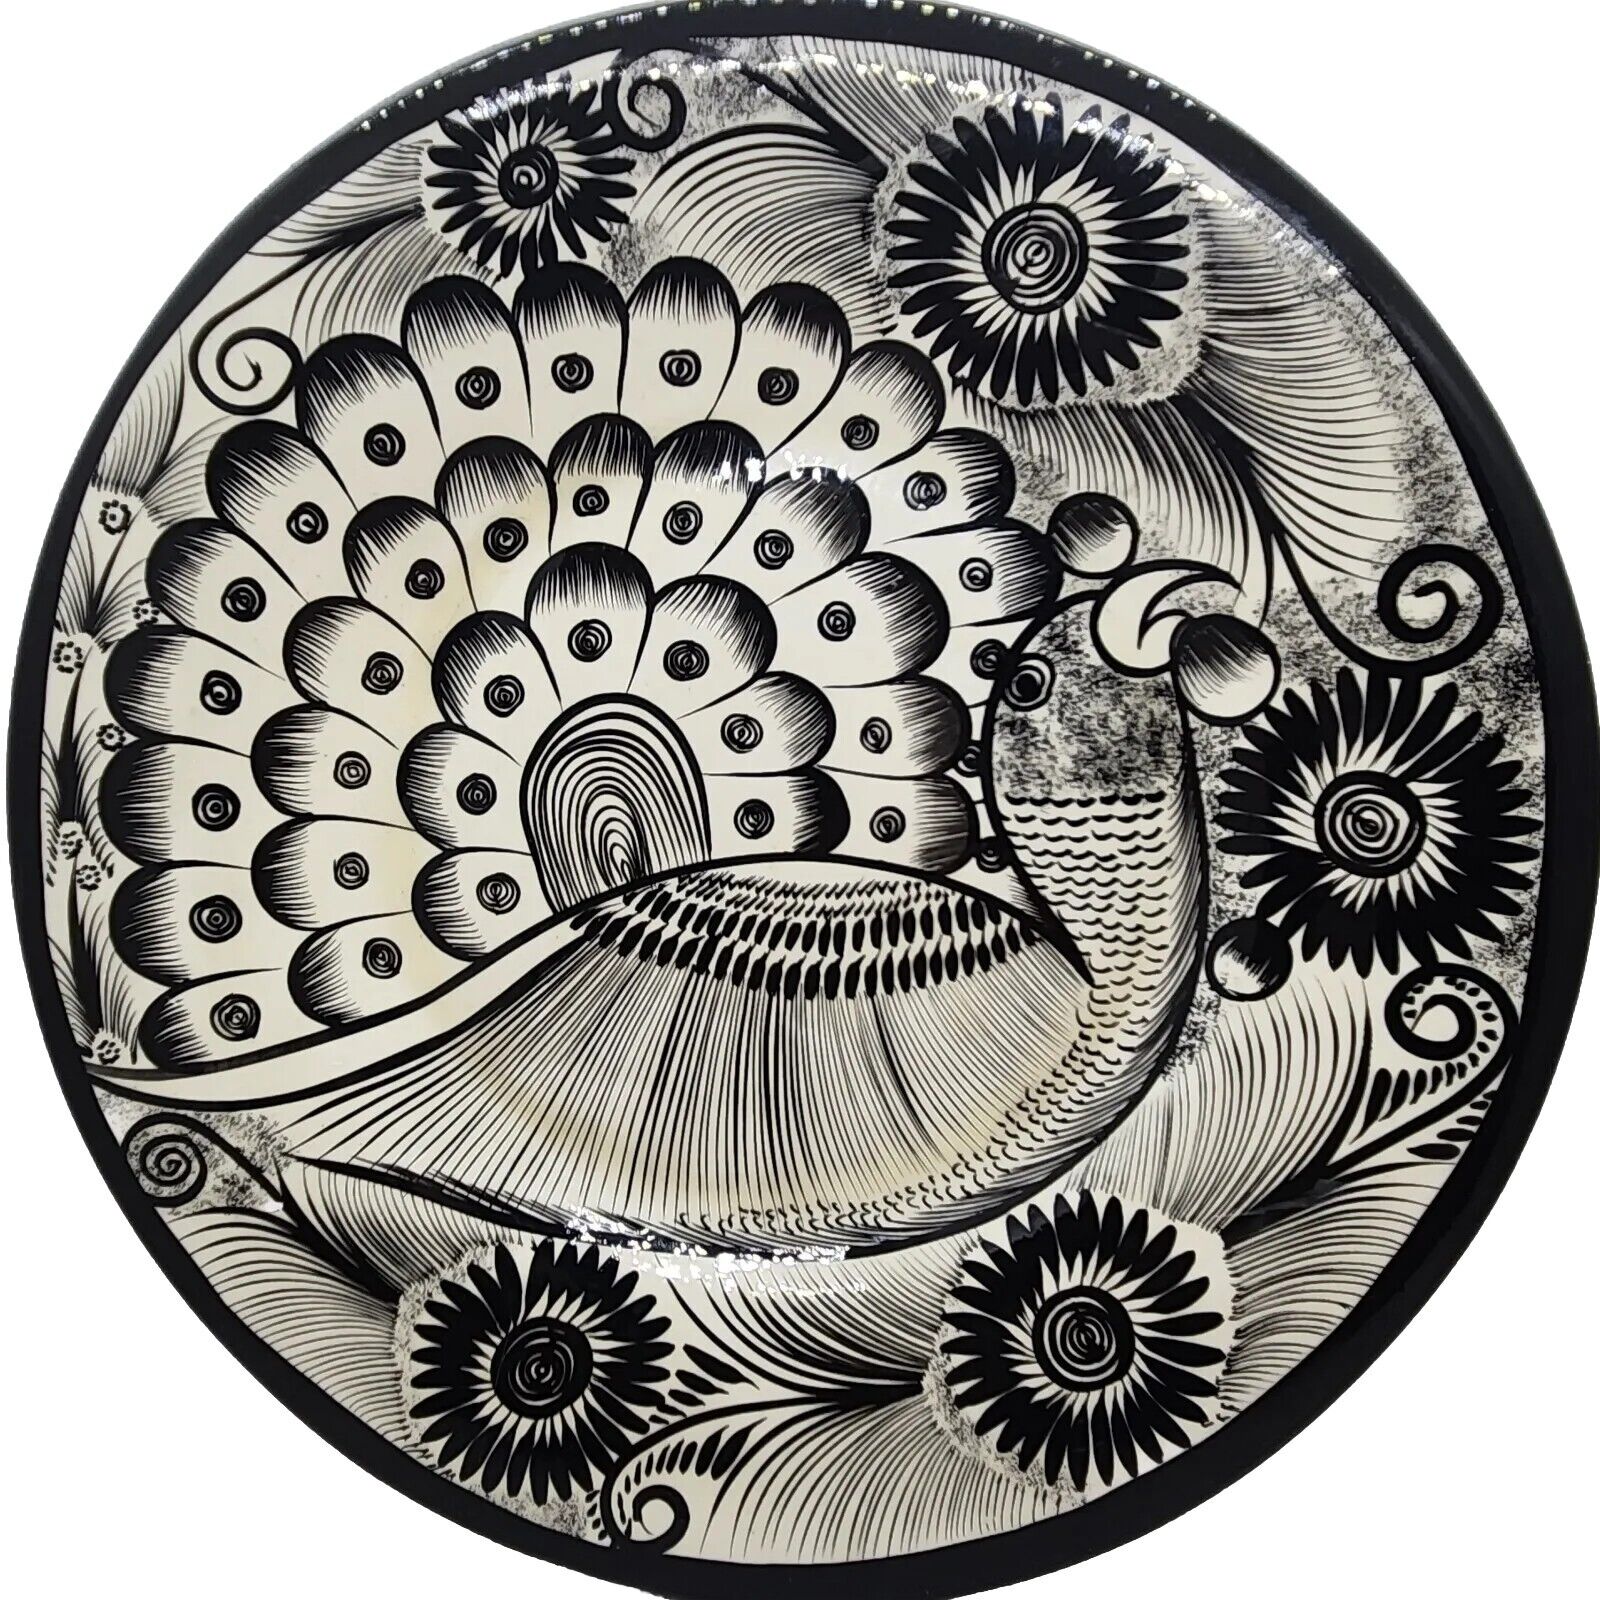 Vintage Handpainted Peacock Decorative Plate Black And White